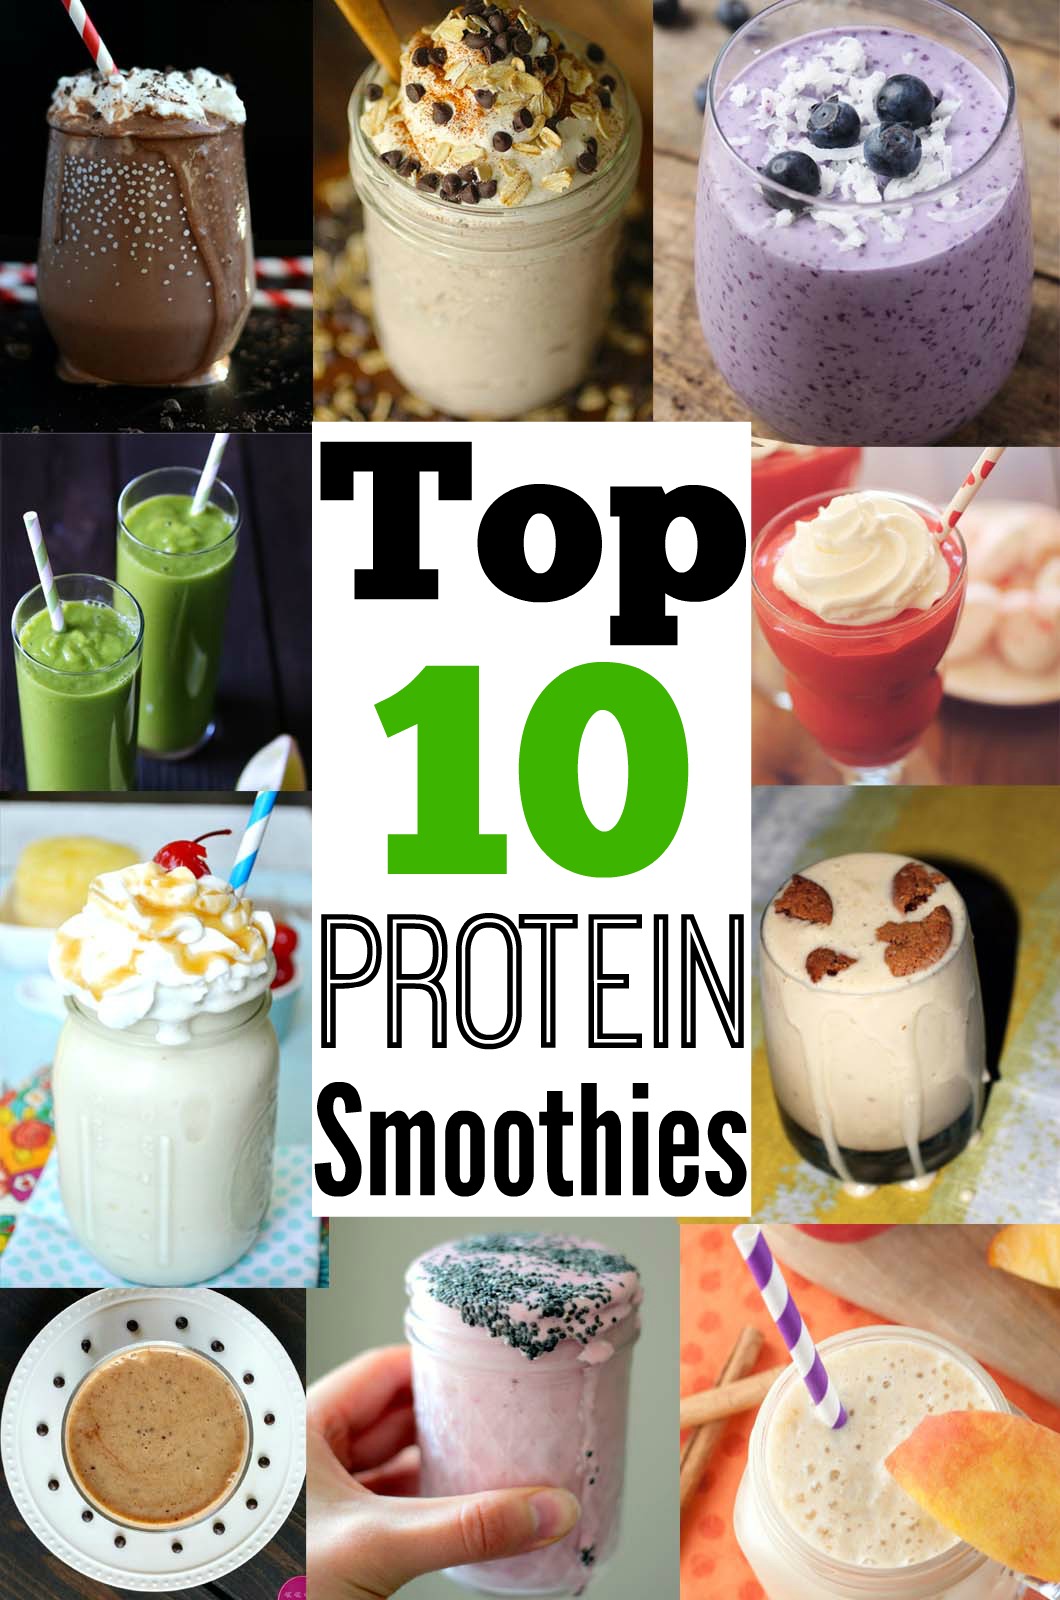 Top 10 Protein Smoothies